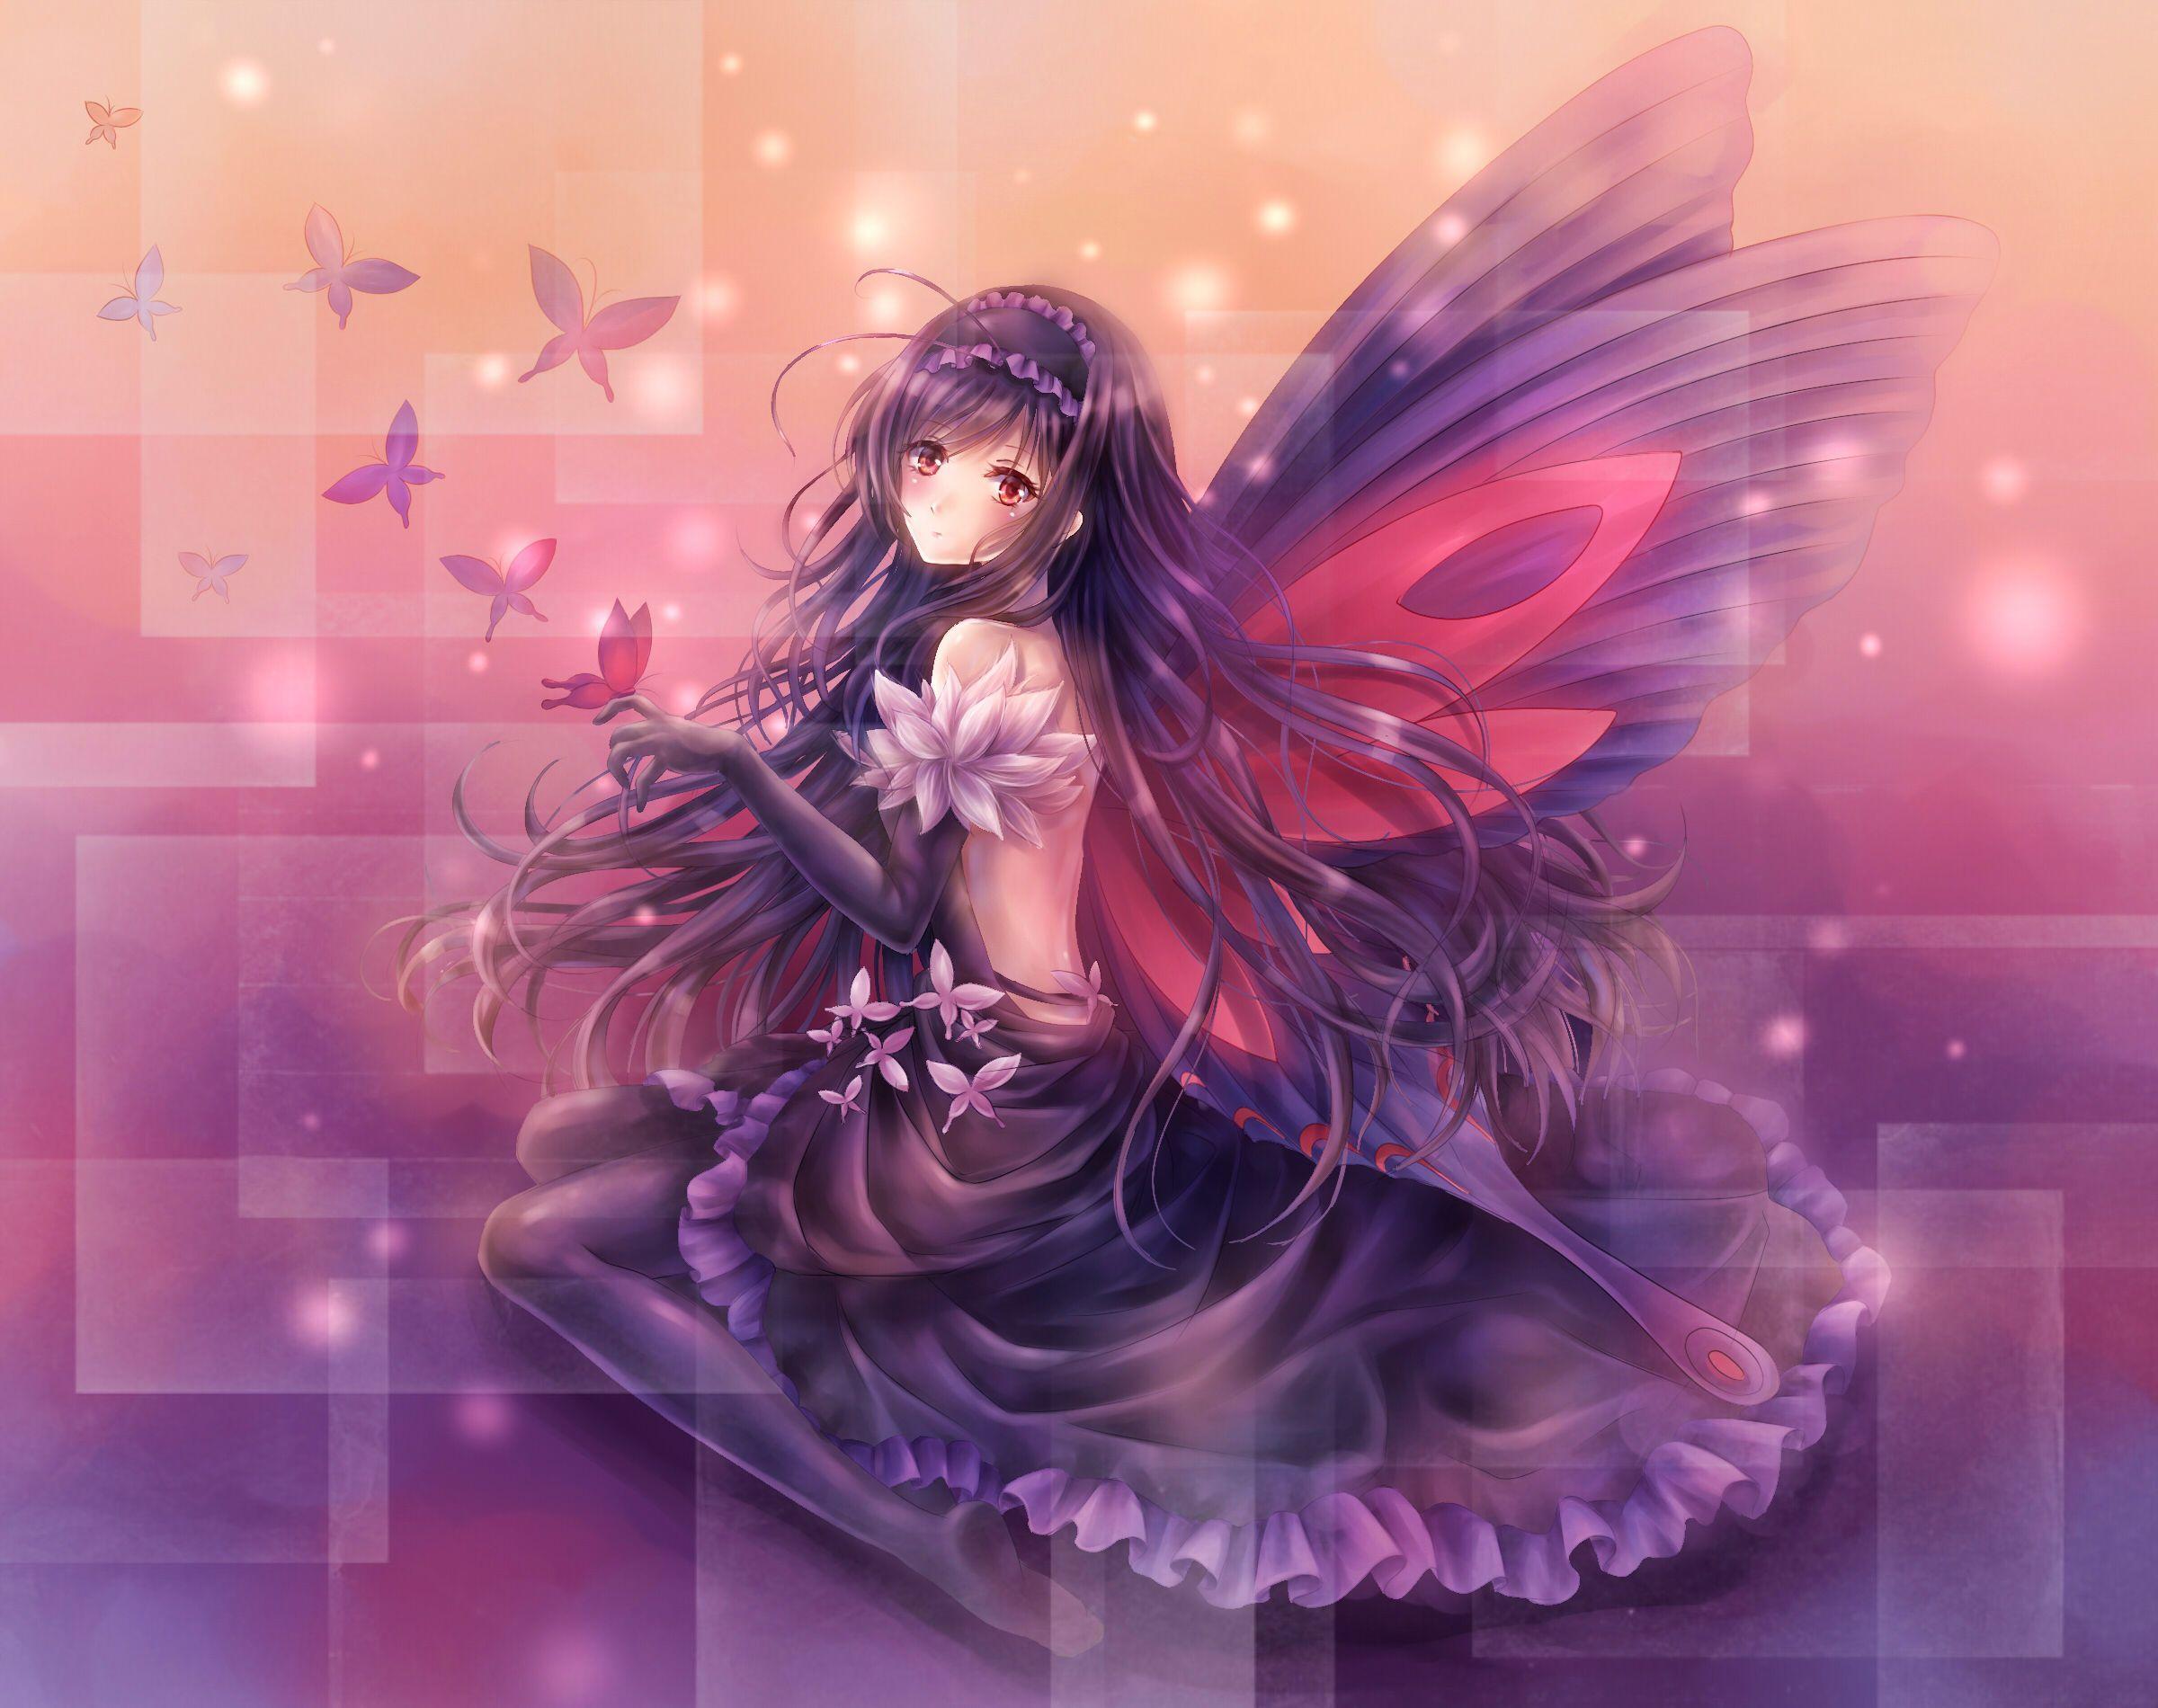 Anime Fairy Girl Wallpapers Top Free Anime Fairy Girl Backgrounds Wallpaperaccess